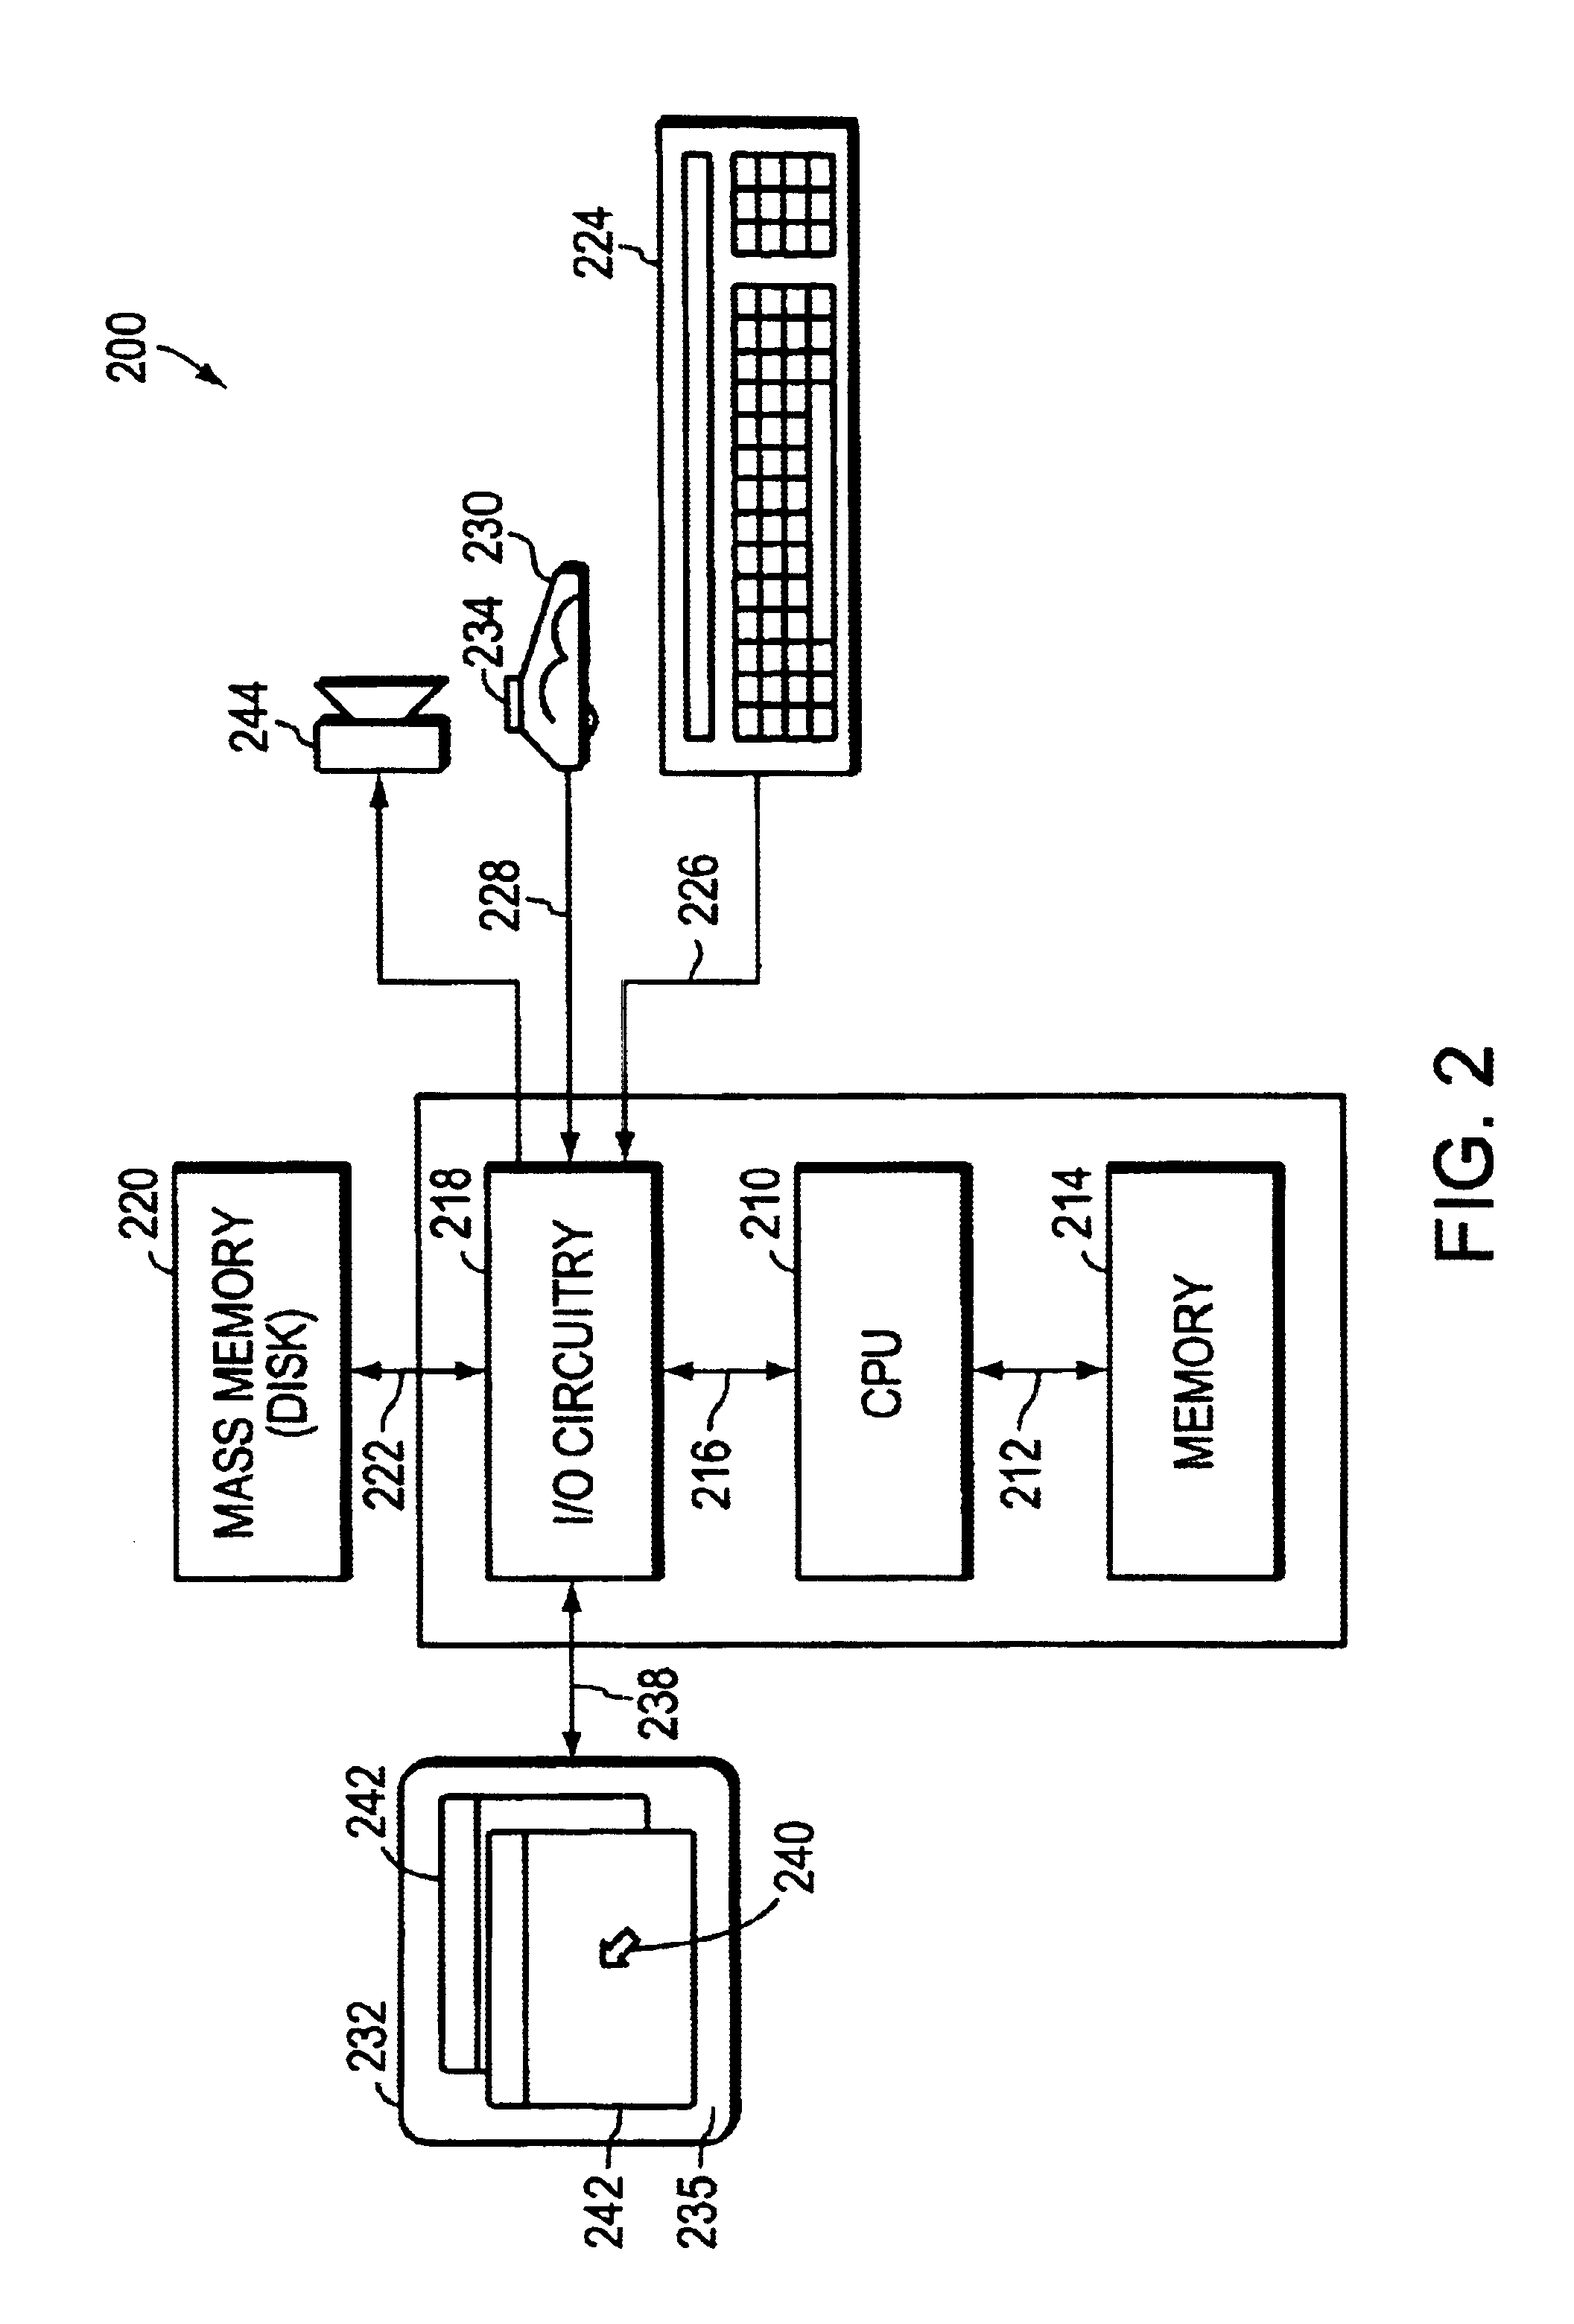 Program object for use in generating application programs